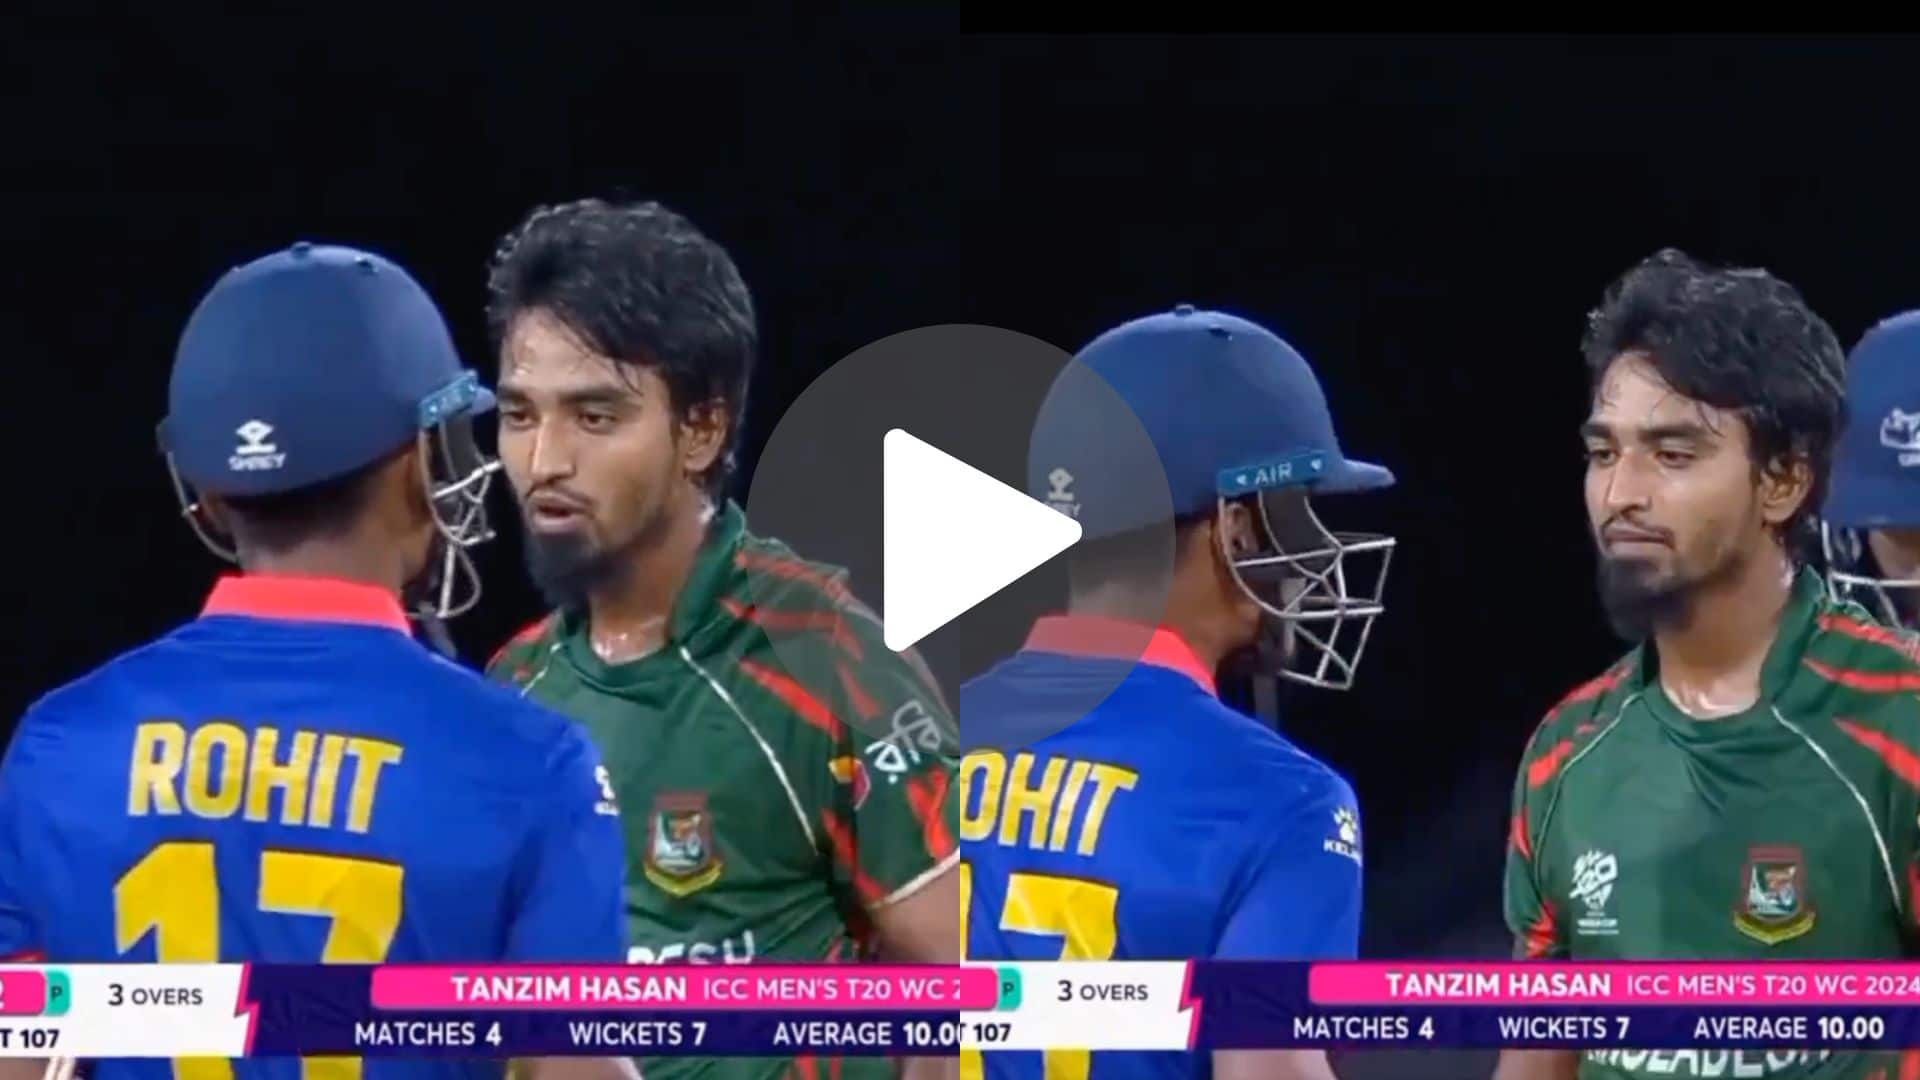 [Watch] Tanzim Gives 'Death Stare' & 'Pushes' Rohit Paudel During A Heated Exchange